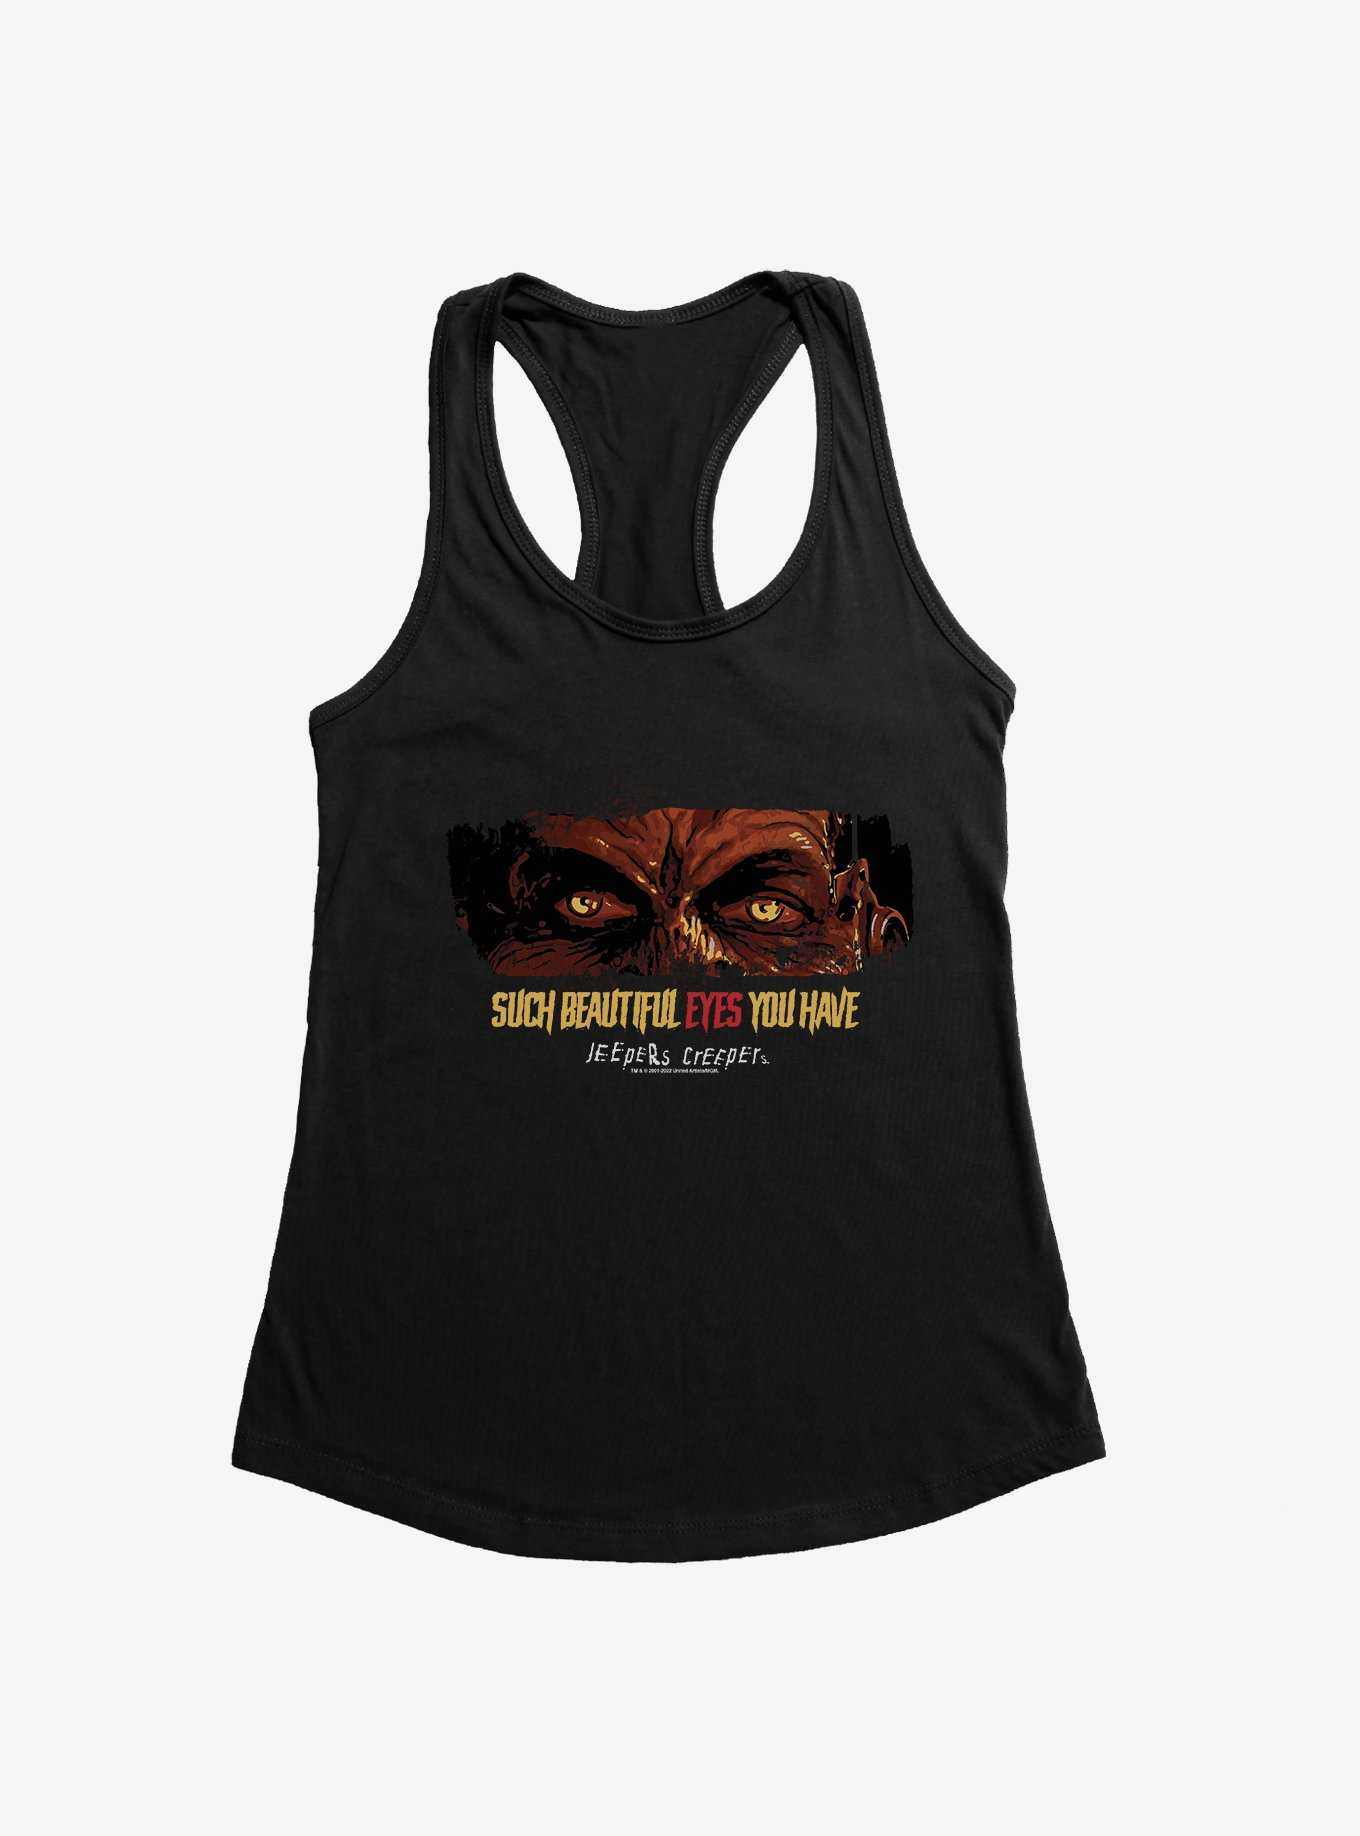 Jeepers Creepers Beautiful Eyes Girls Tank, , hi-res